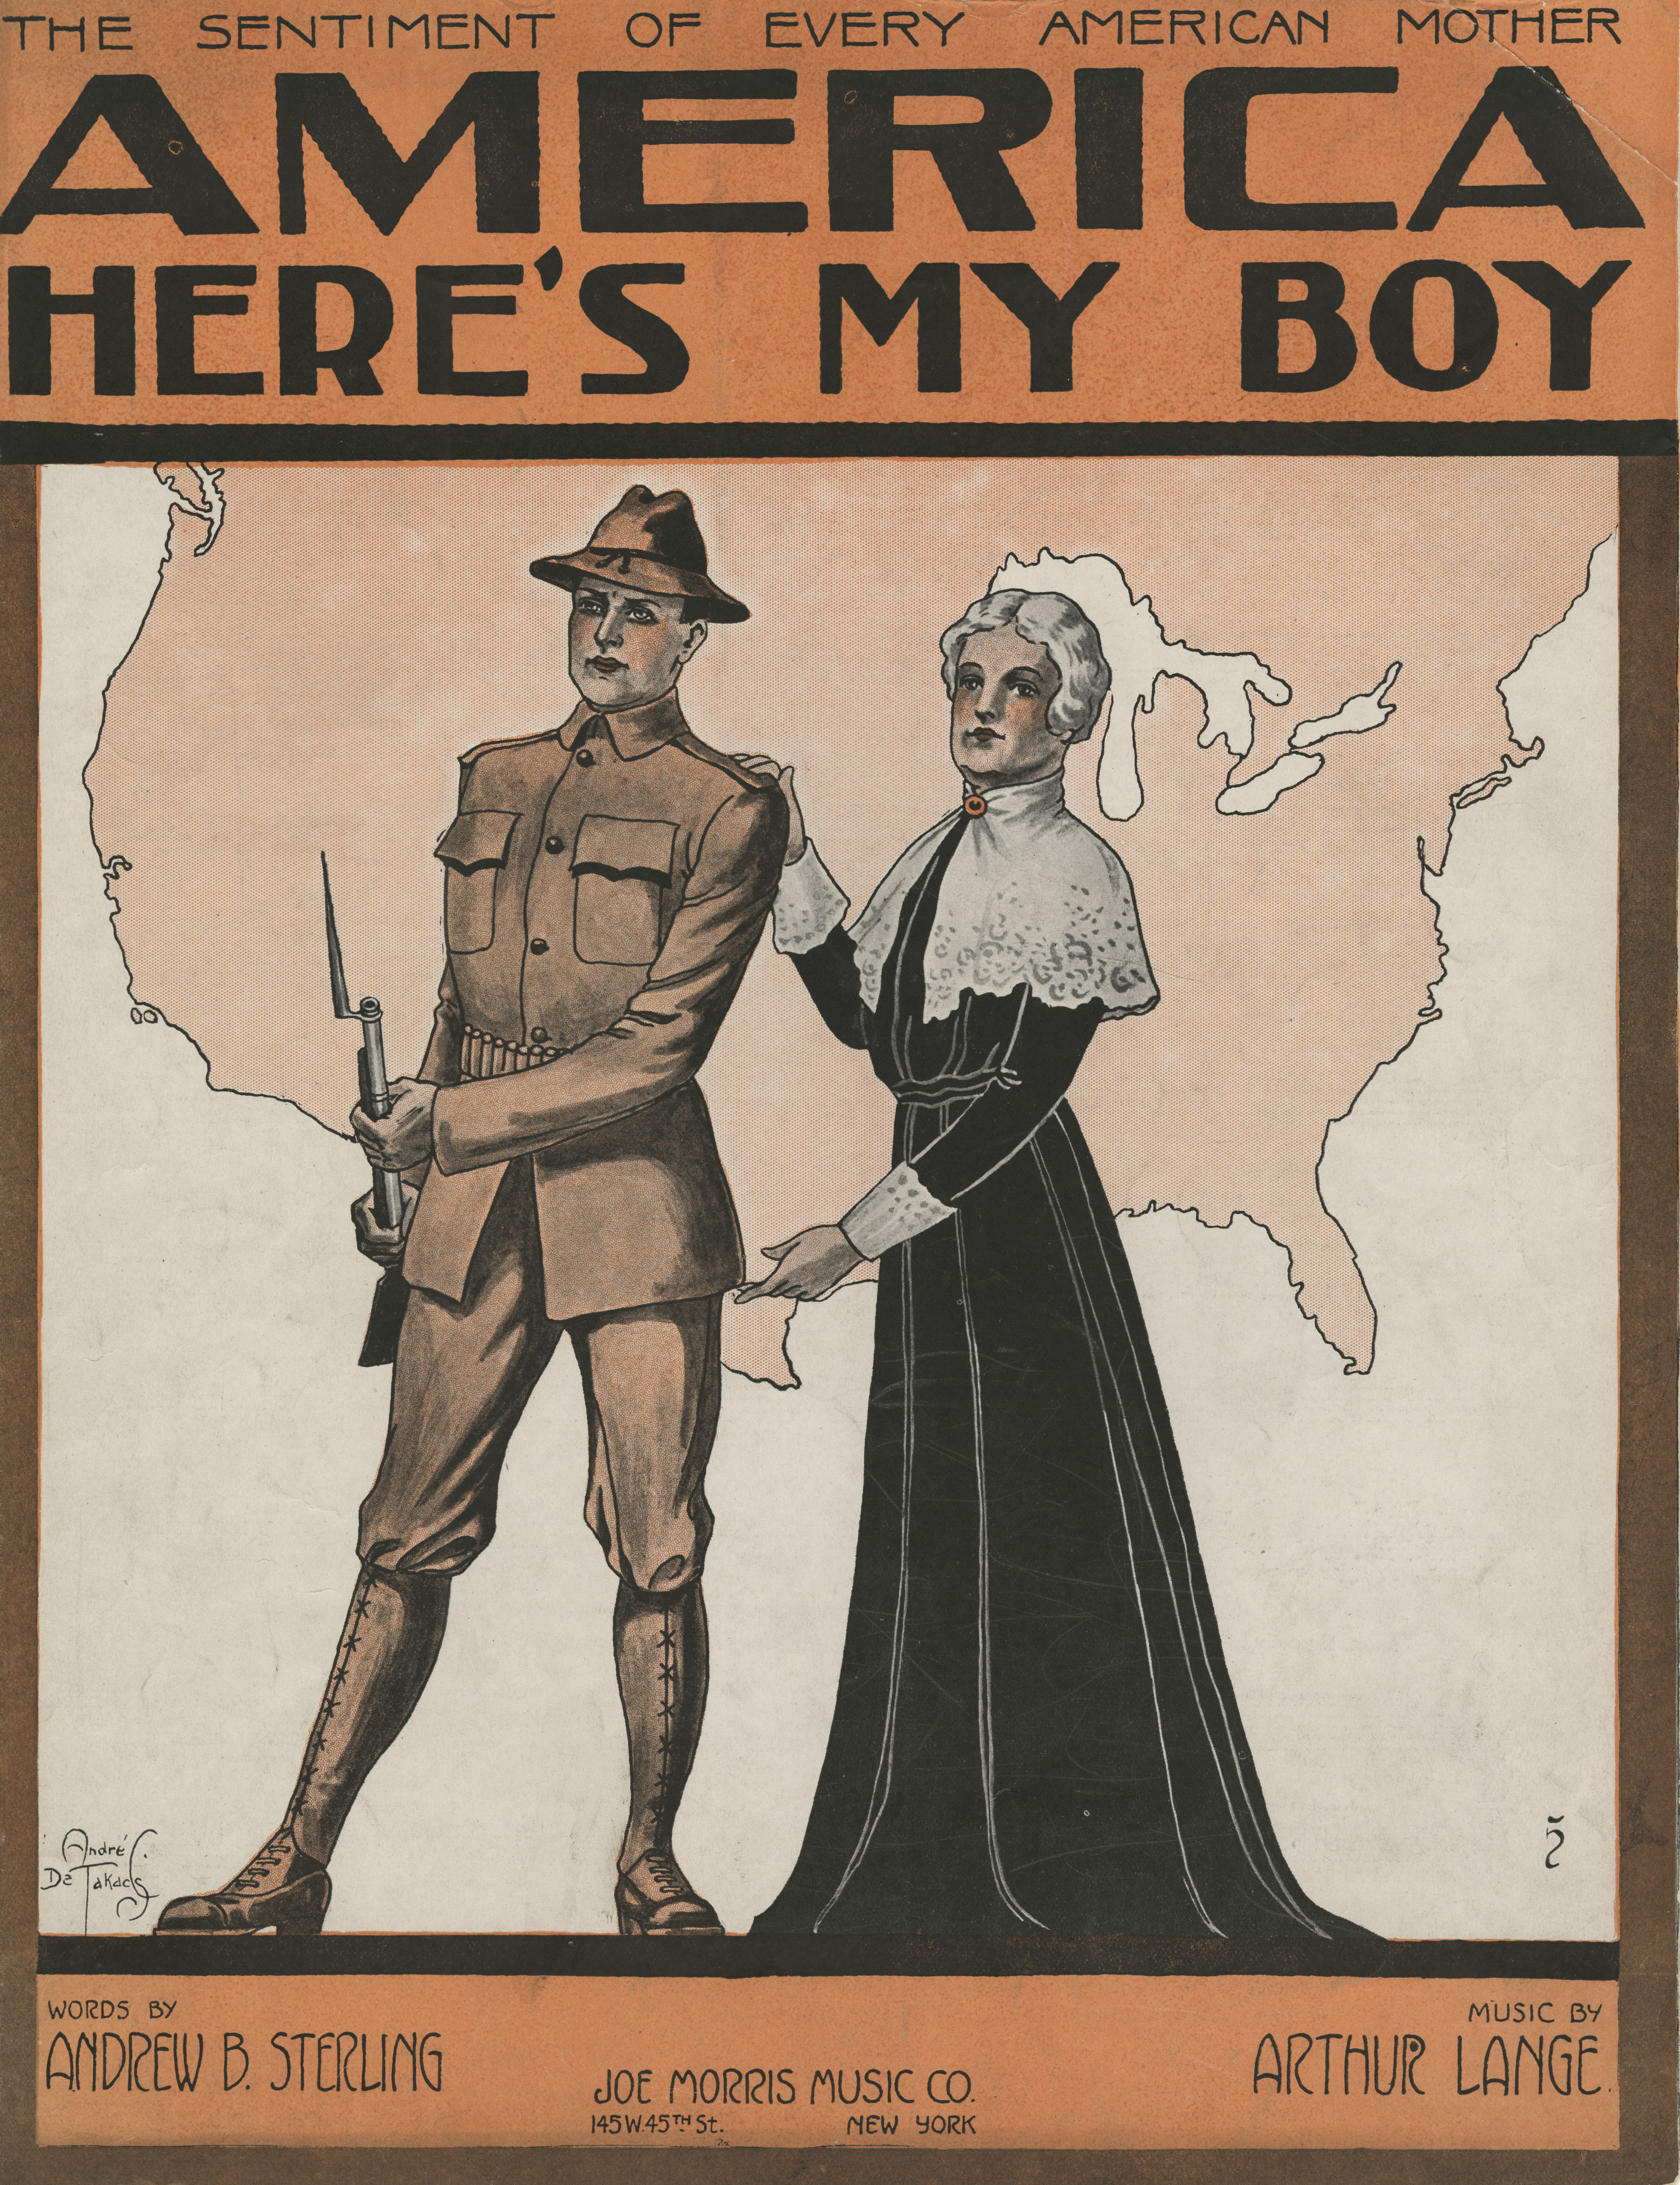 "America, Here's My Boy" (Published by Joe Morris Music Co., New York, 1917)